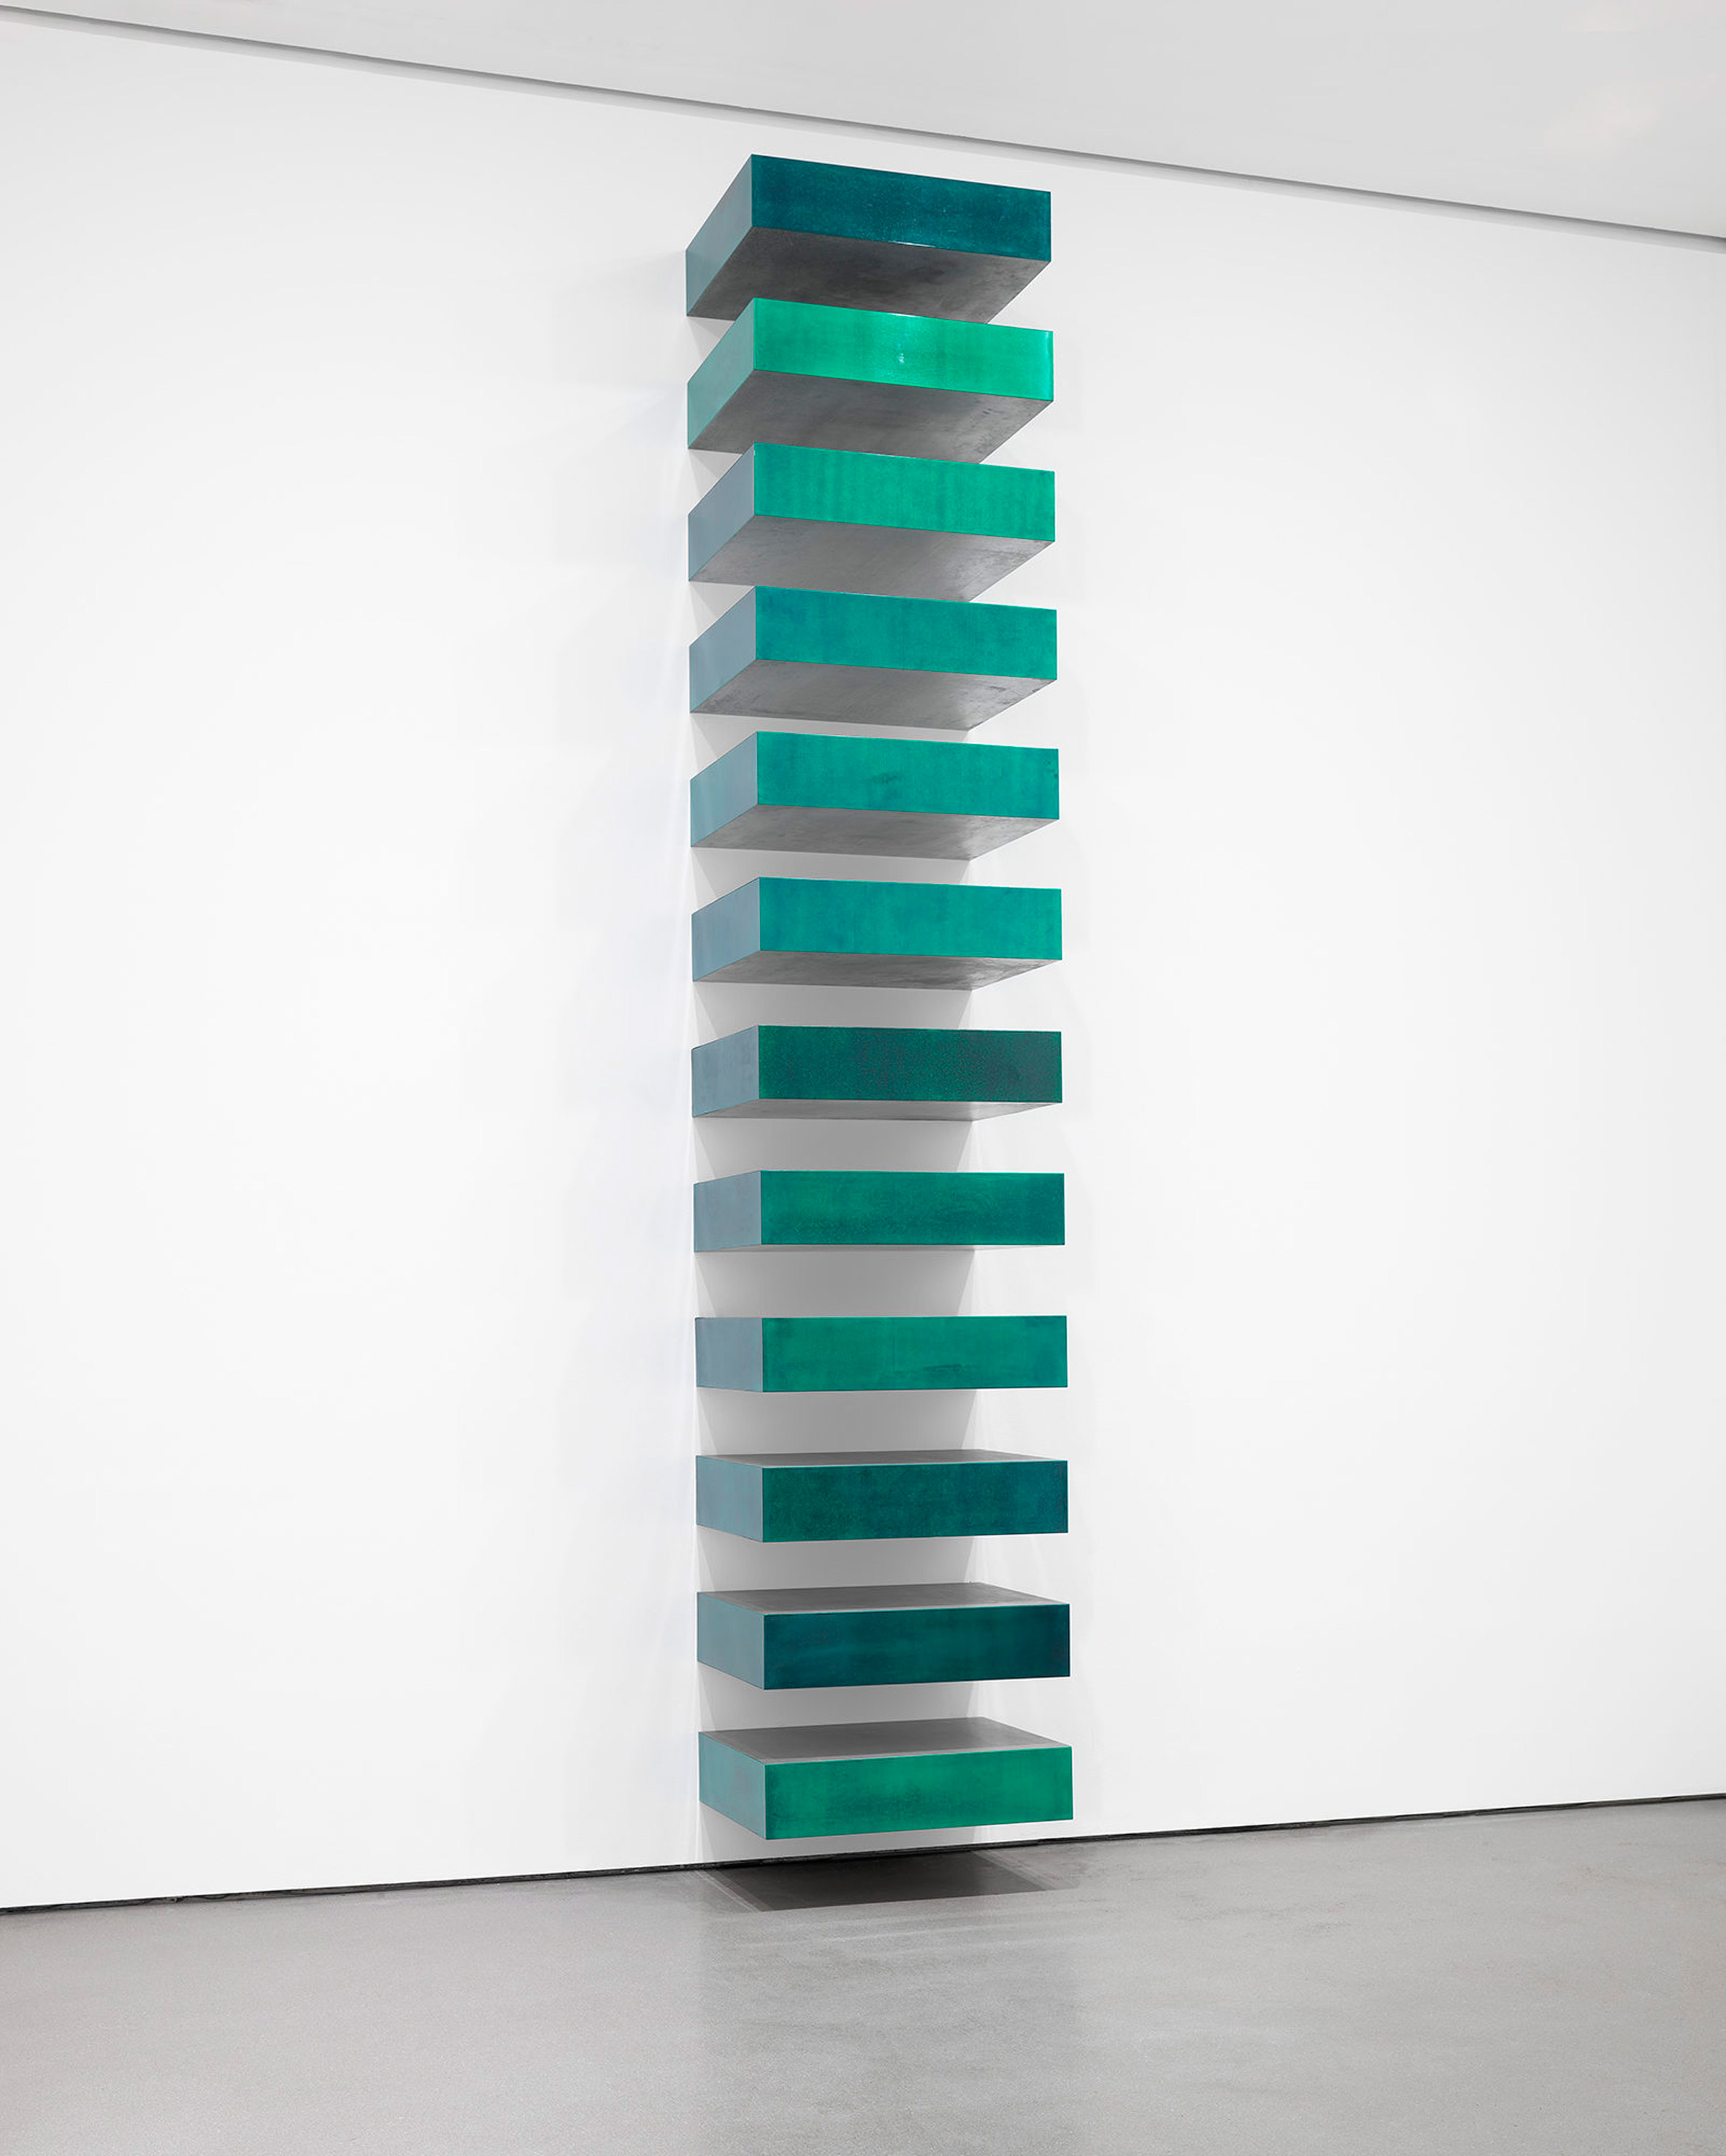 Donald Judd exhibition at MoMA